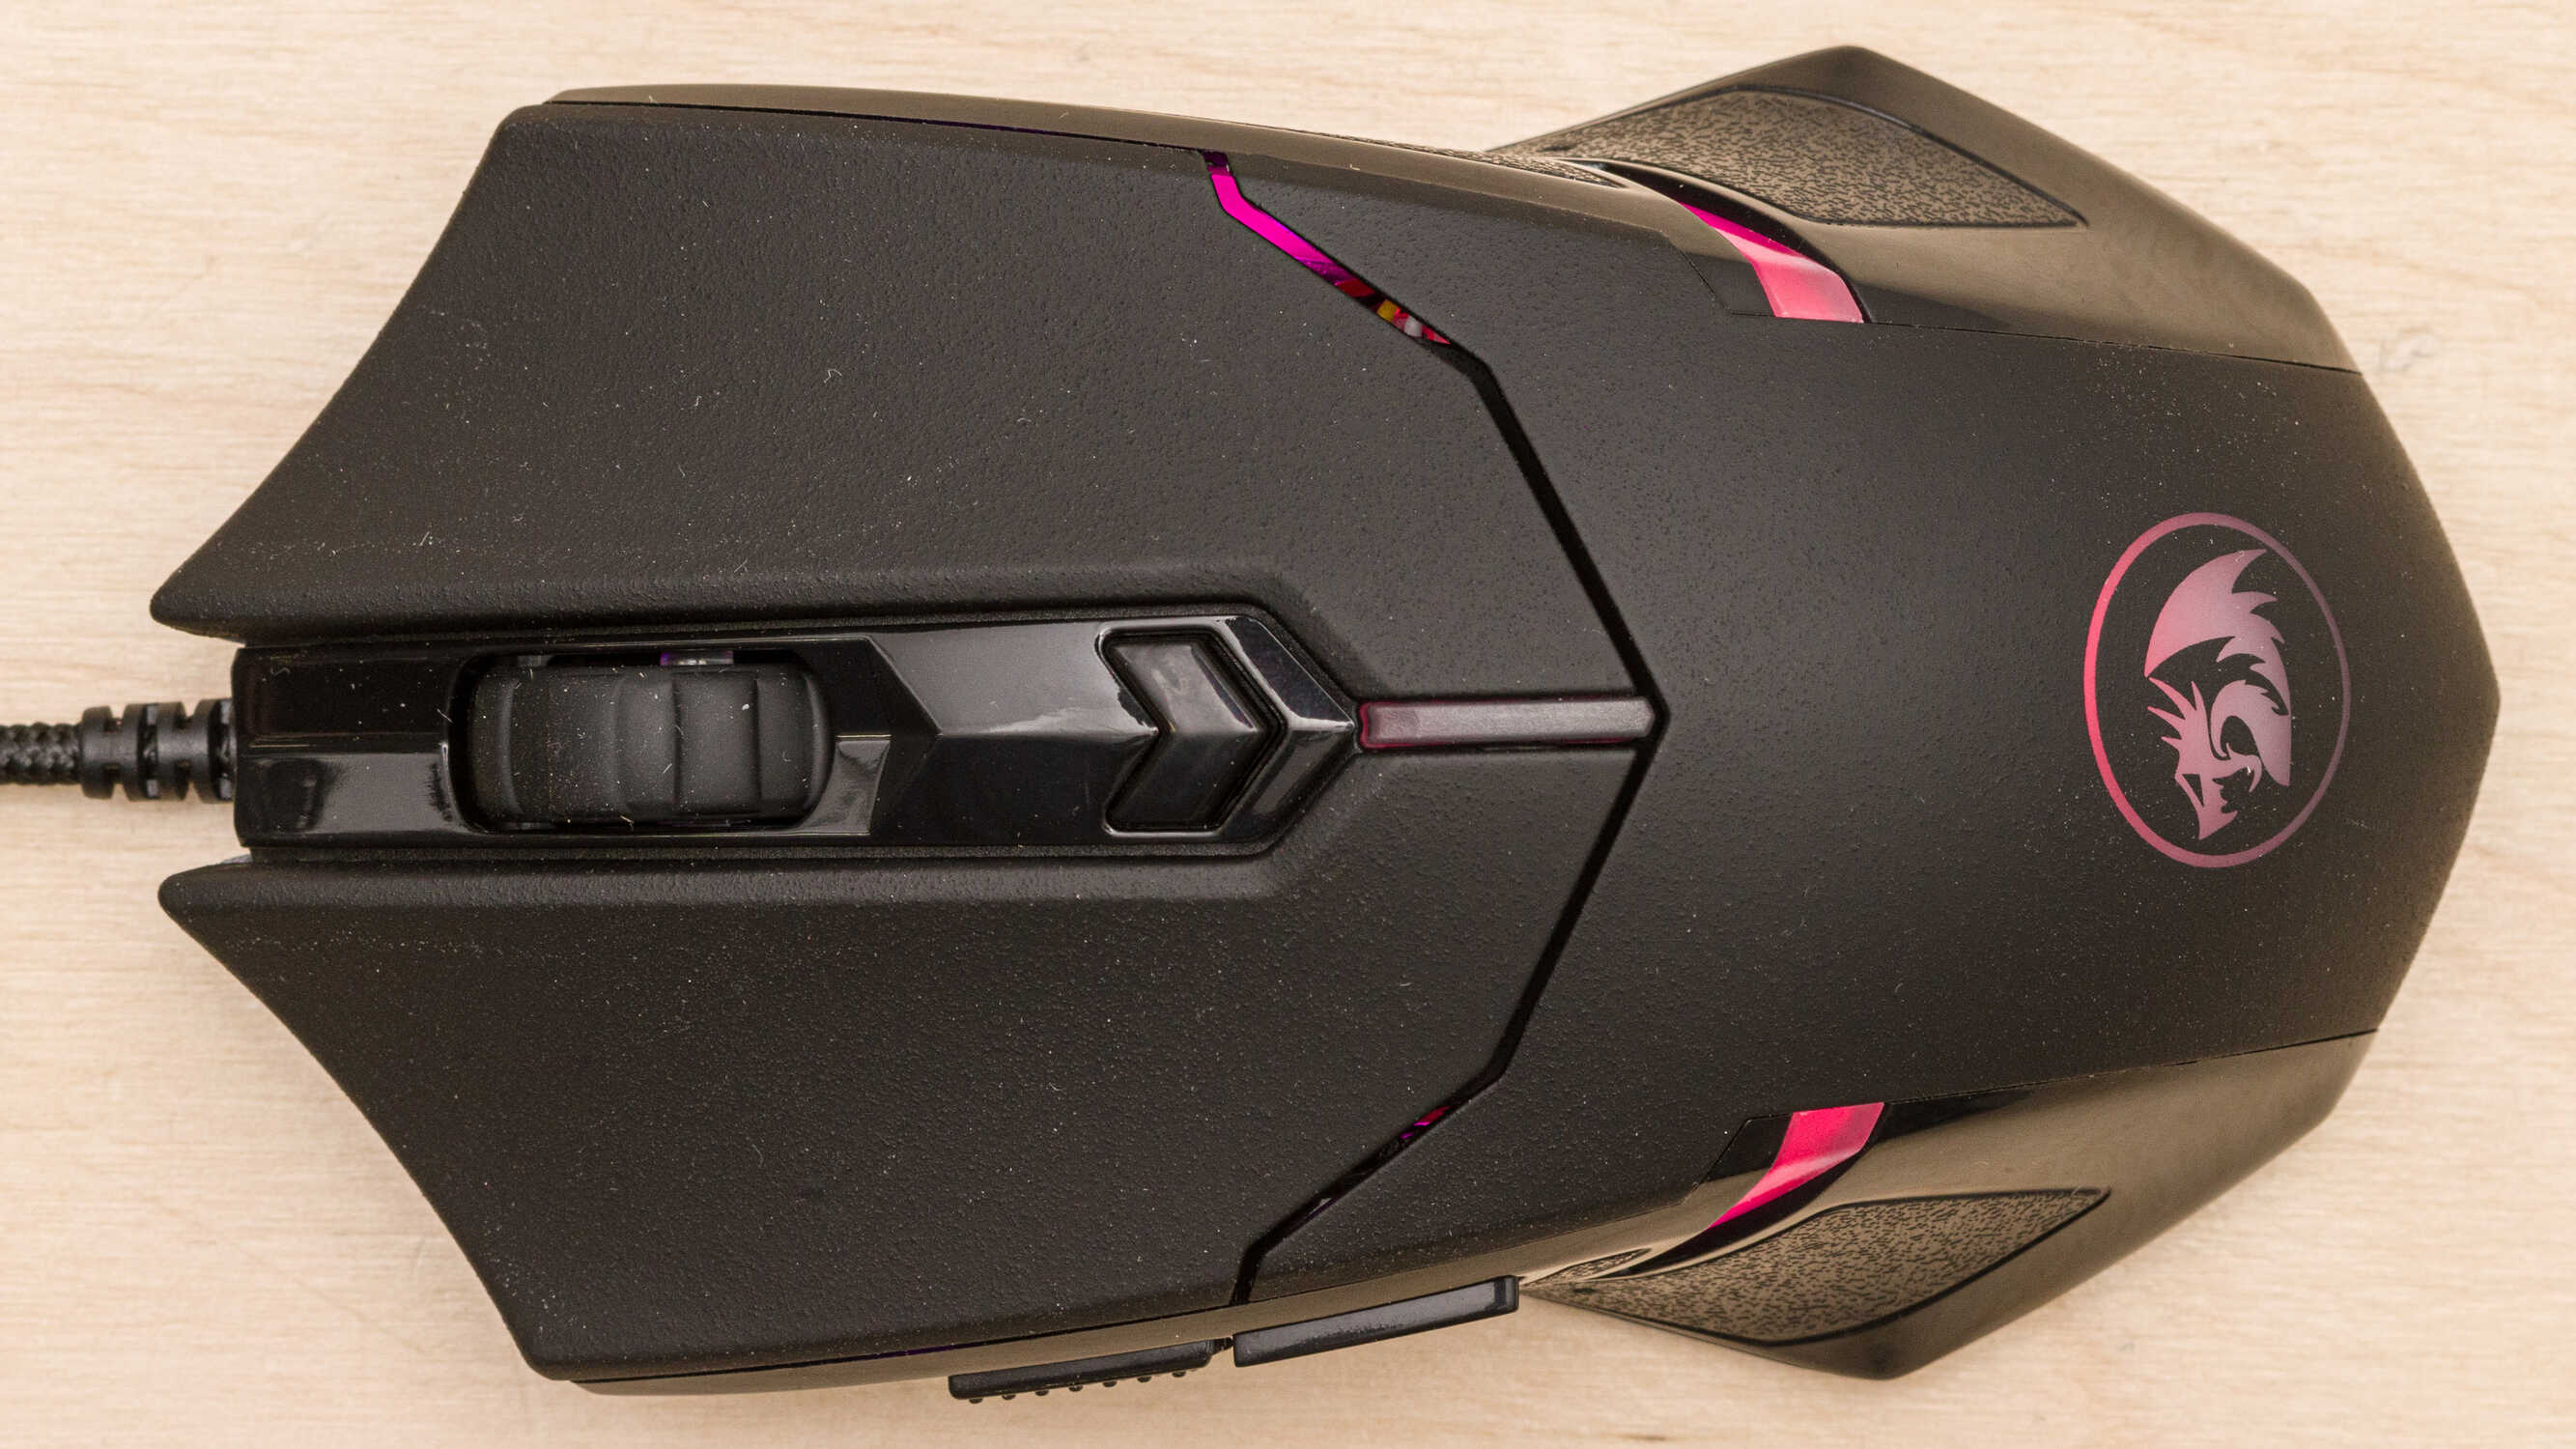 what-is-the-software-for-the-centrophorus-redragon-gaming-mouse